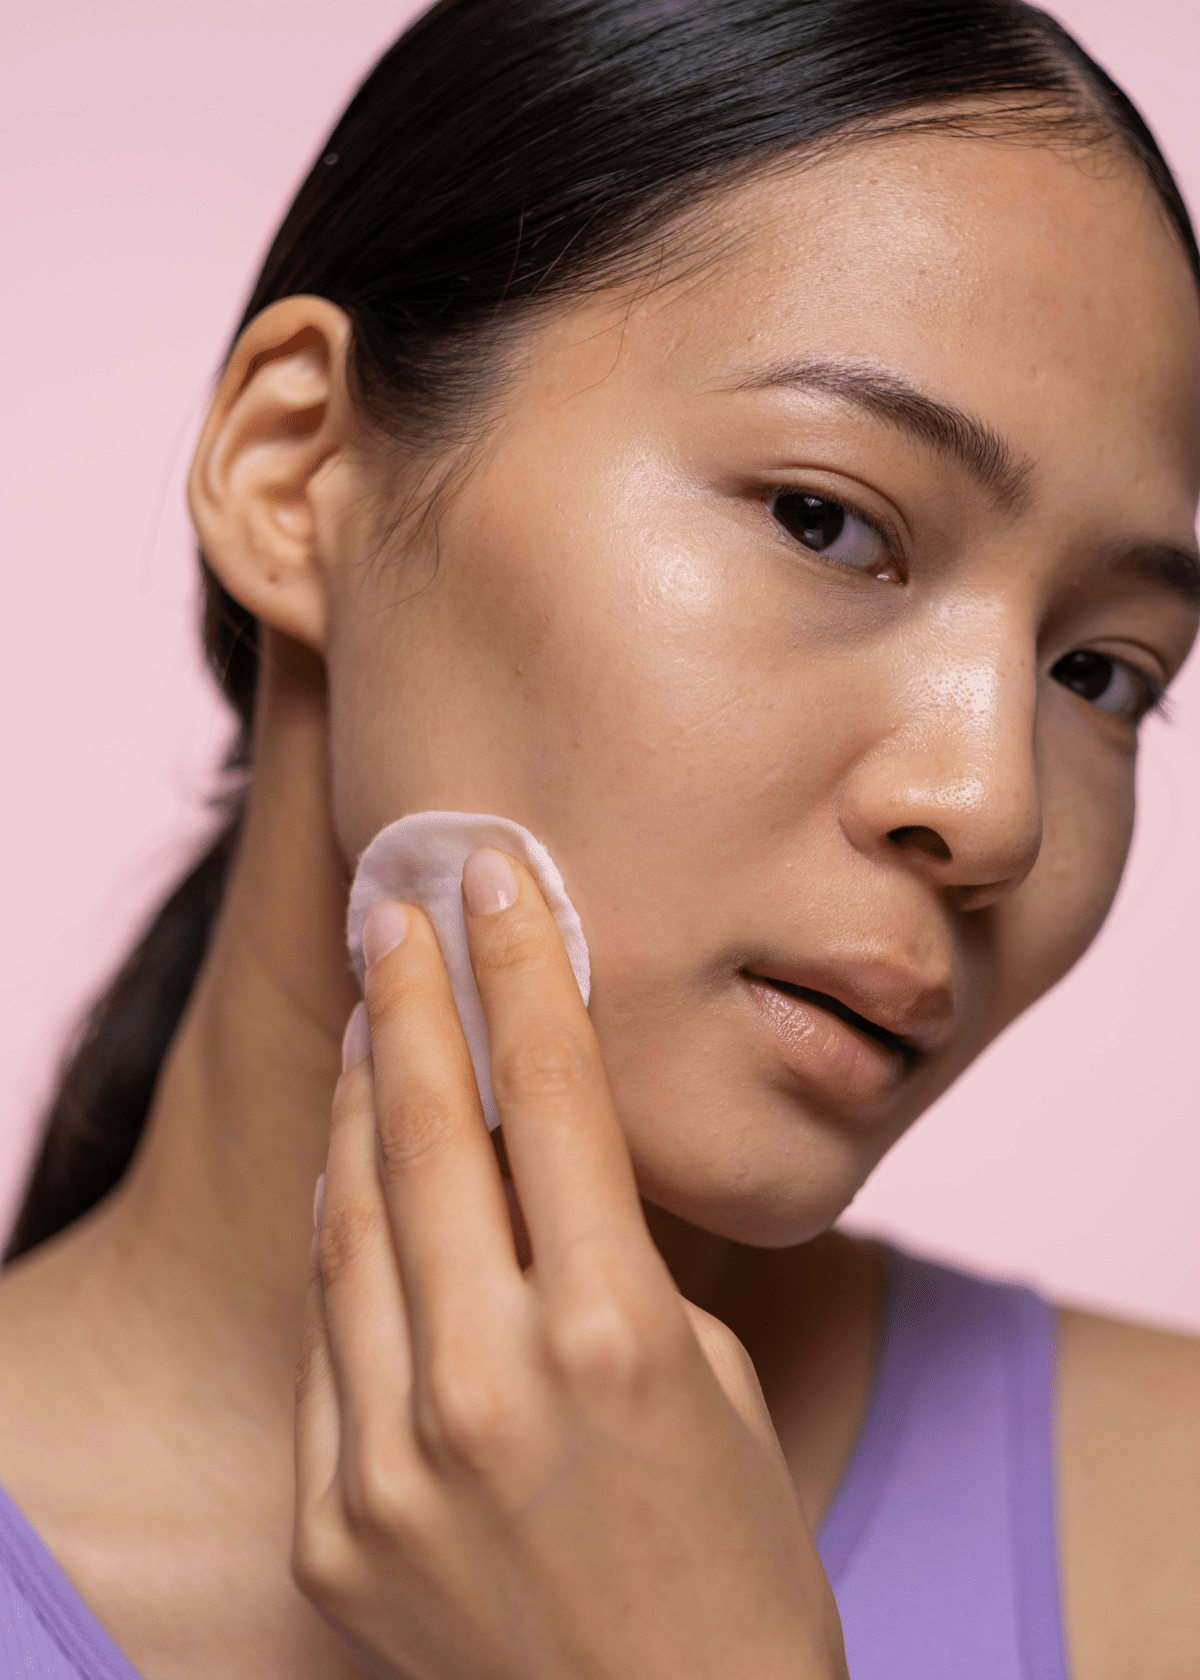 Everything You Need to Know About Vitamin C Toner and Acne